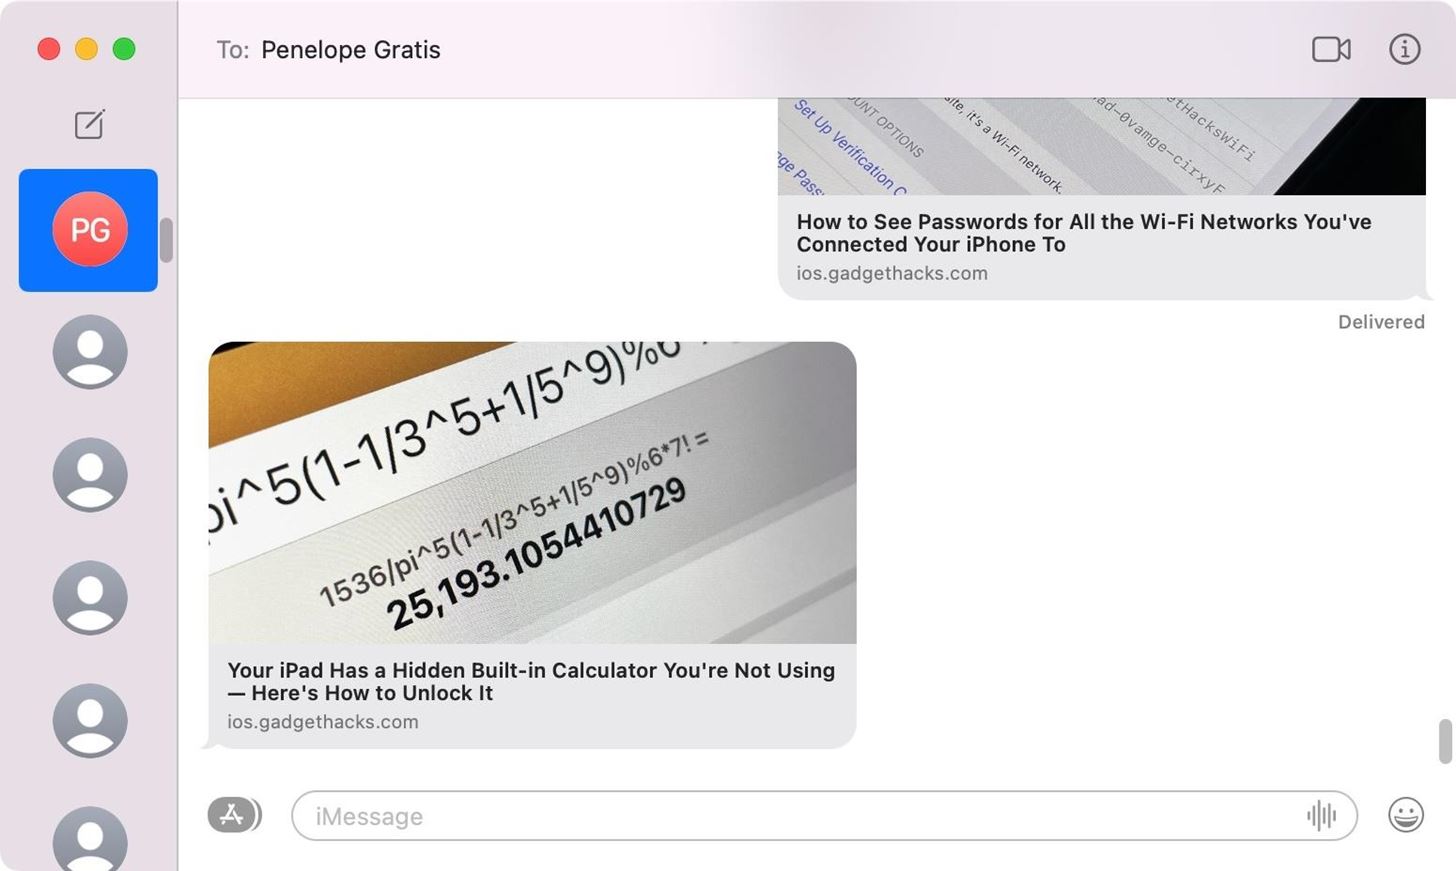 If You Don't Like This Always-on Apple Messages Feature, There's a Secret Way to Disable It